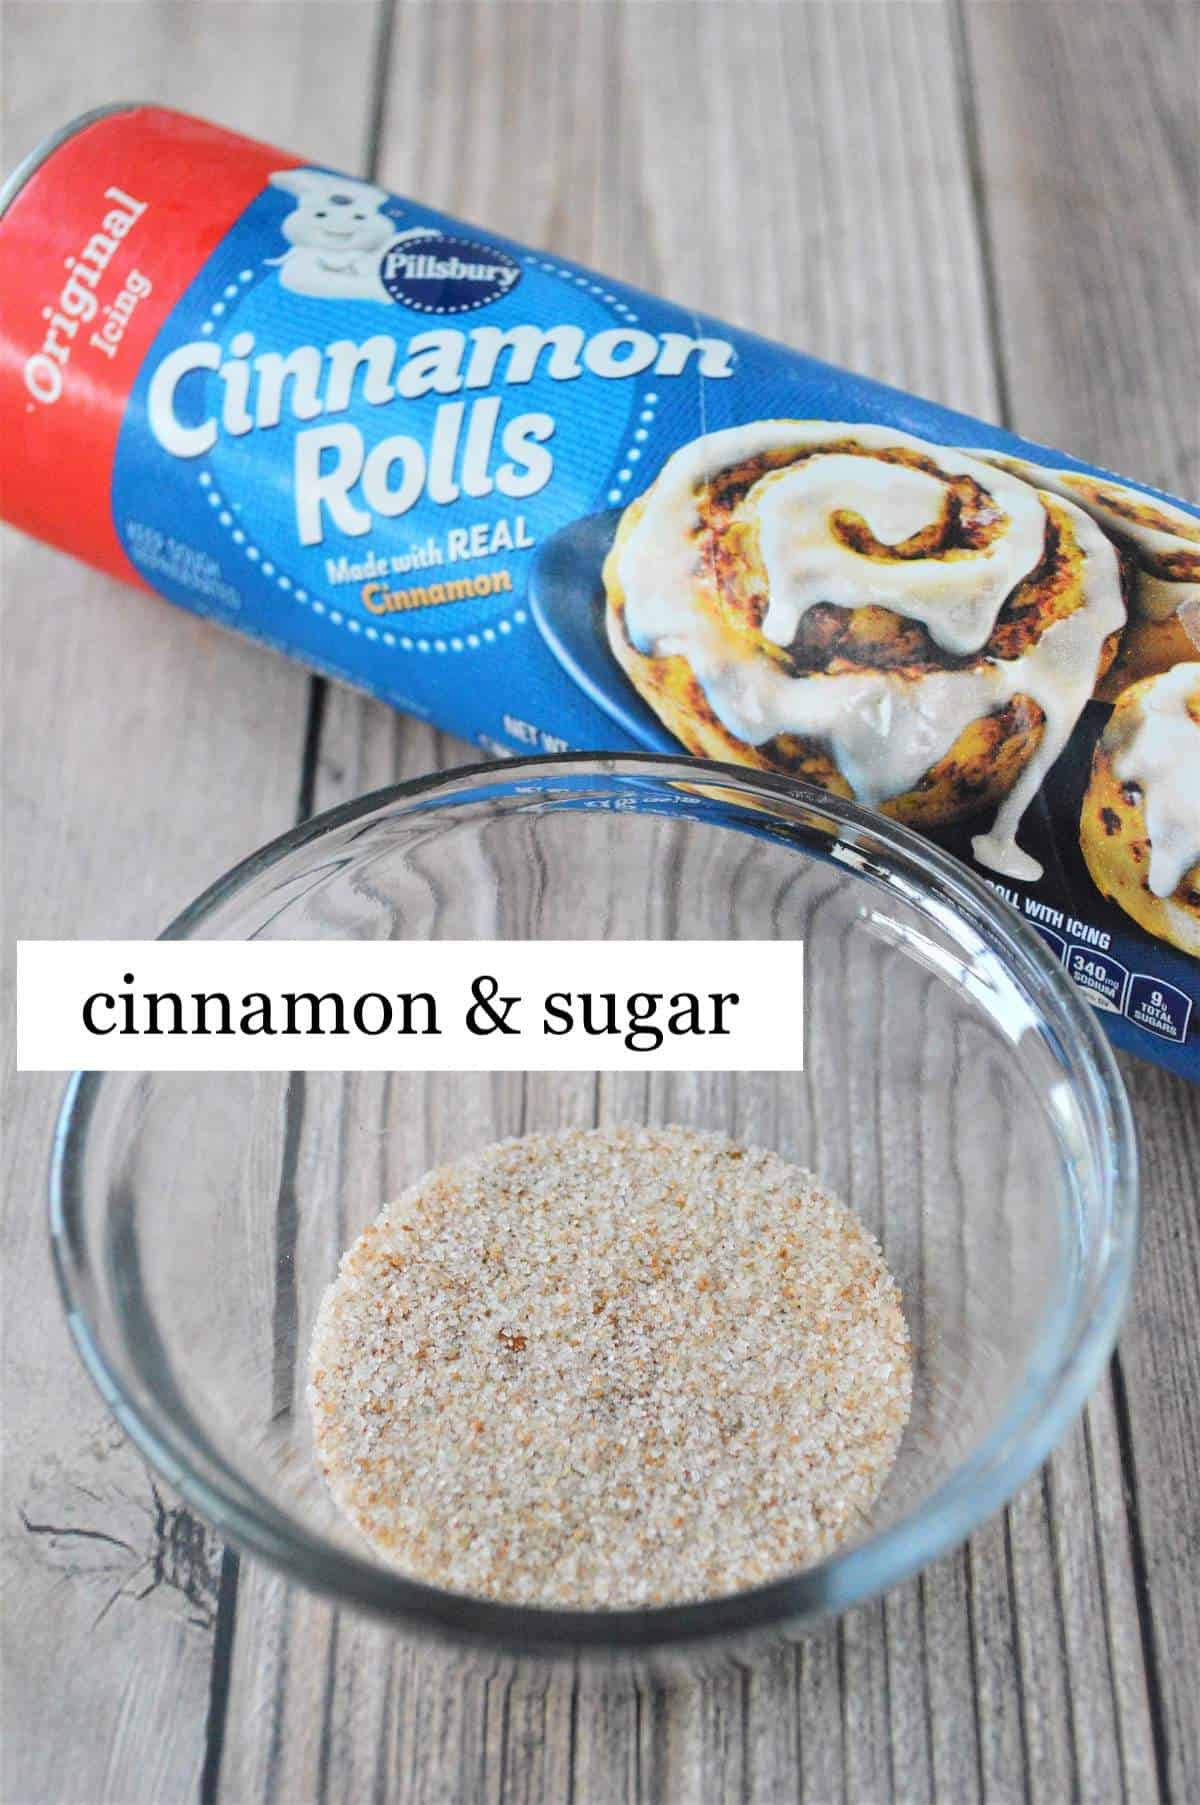 The ingredients in a giant cinnamon roll, laid out and labeled.